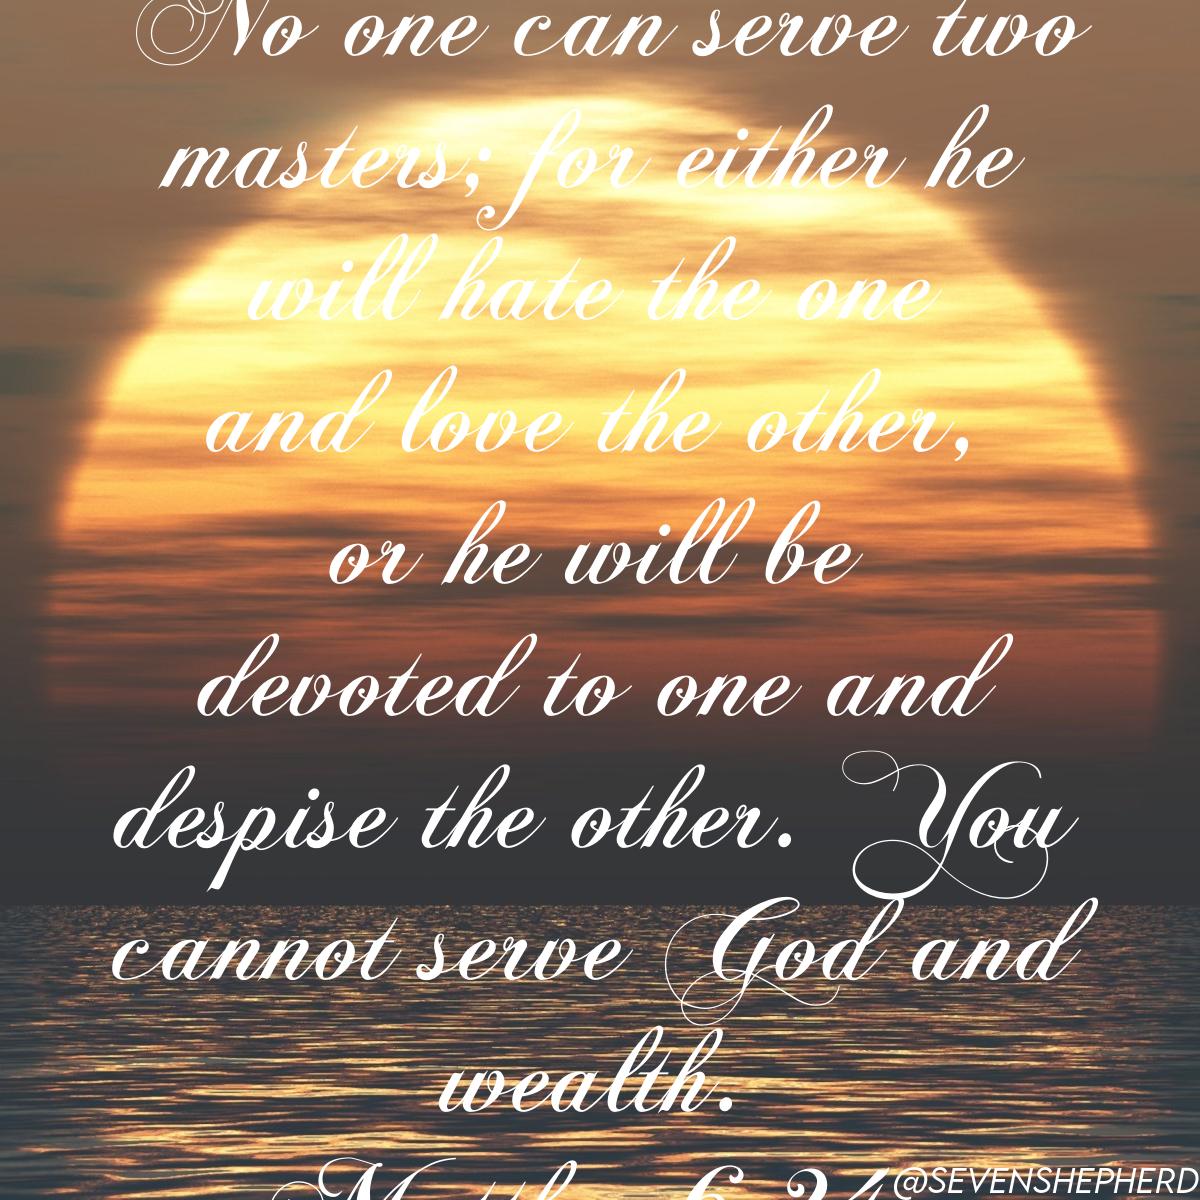 '“No one can serve two masters; for either he will hate the one and love the other, or he will be devoted to one and despise the other. You cannot serve God and wealth.' — Matthew 6:24 LSB #Jesus #God #Bible